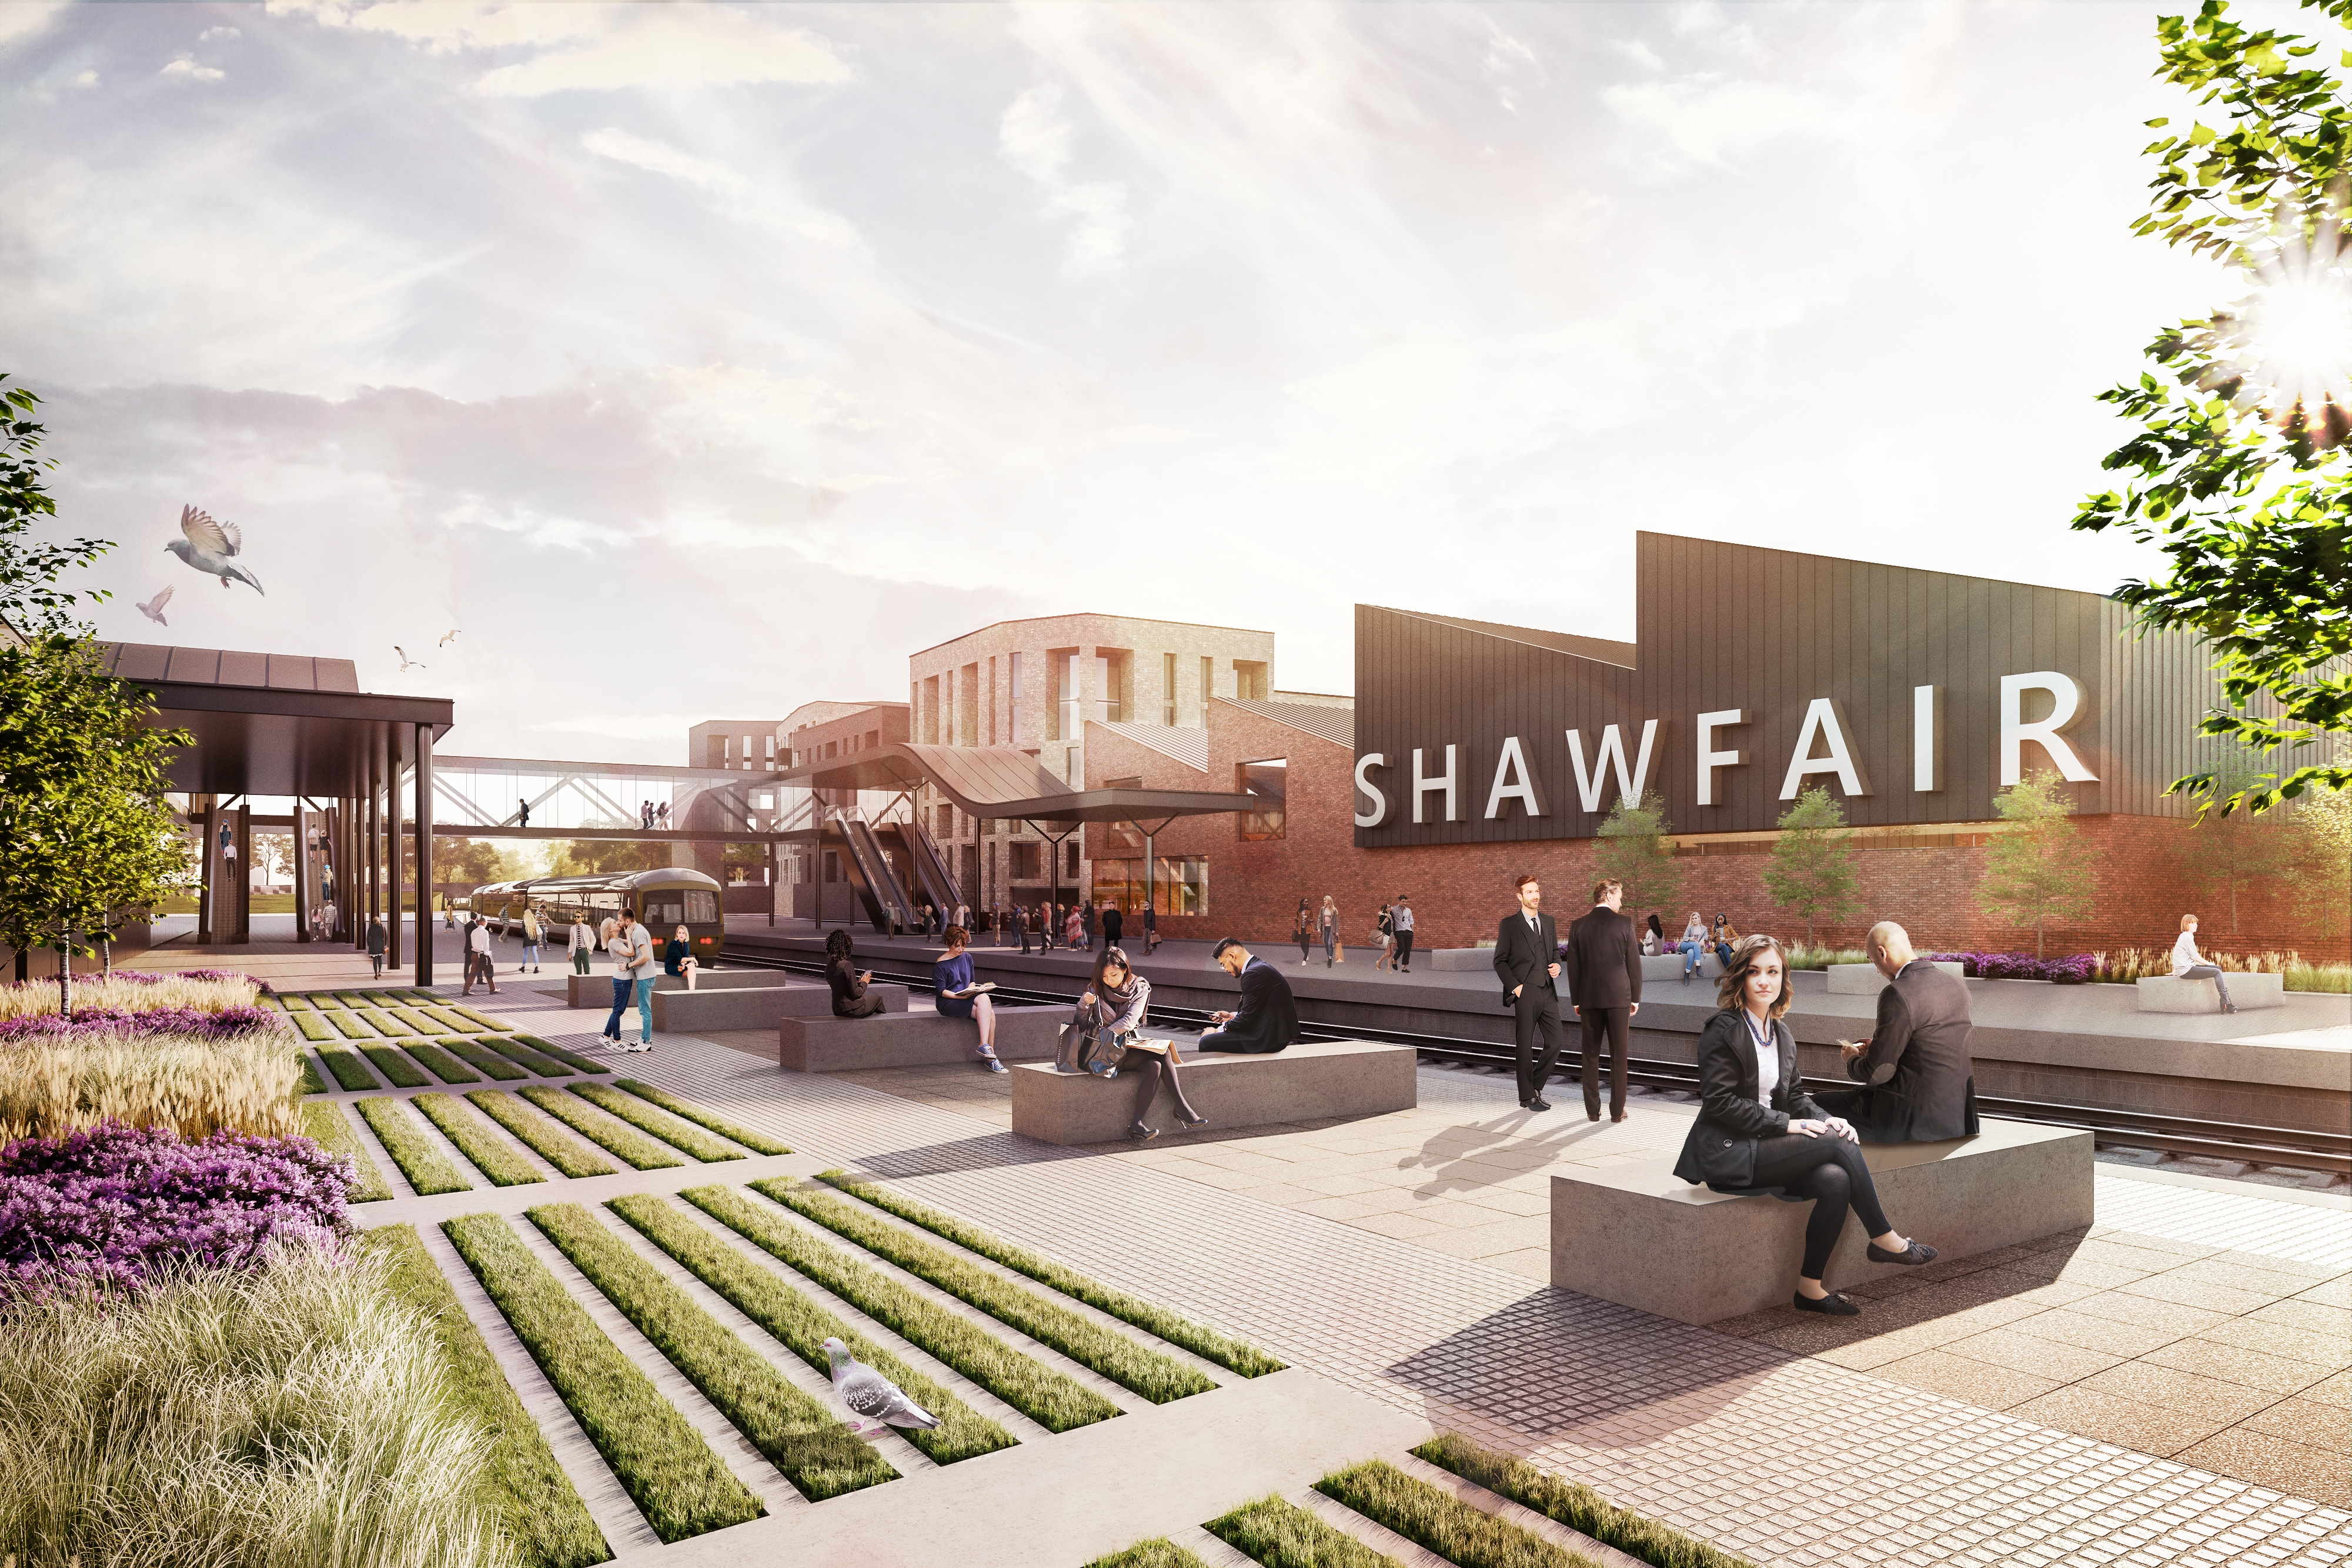 Land sale puts Shawfair on course for more than 1,000 new homes